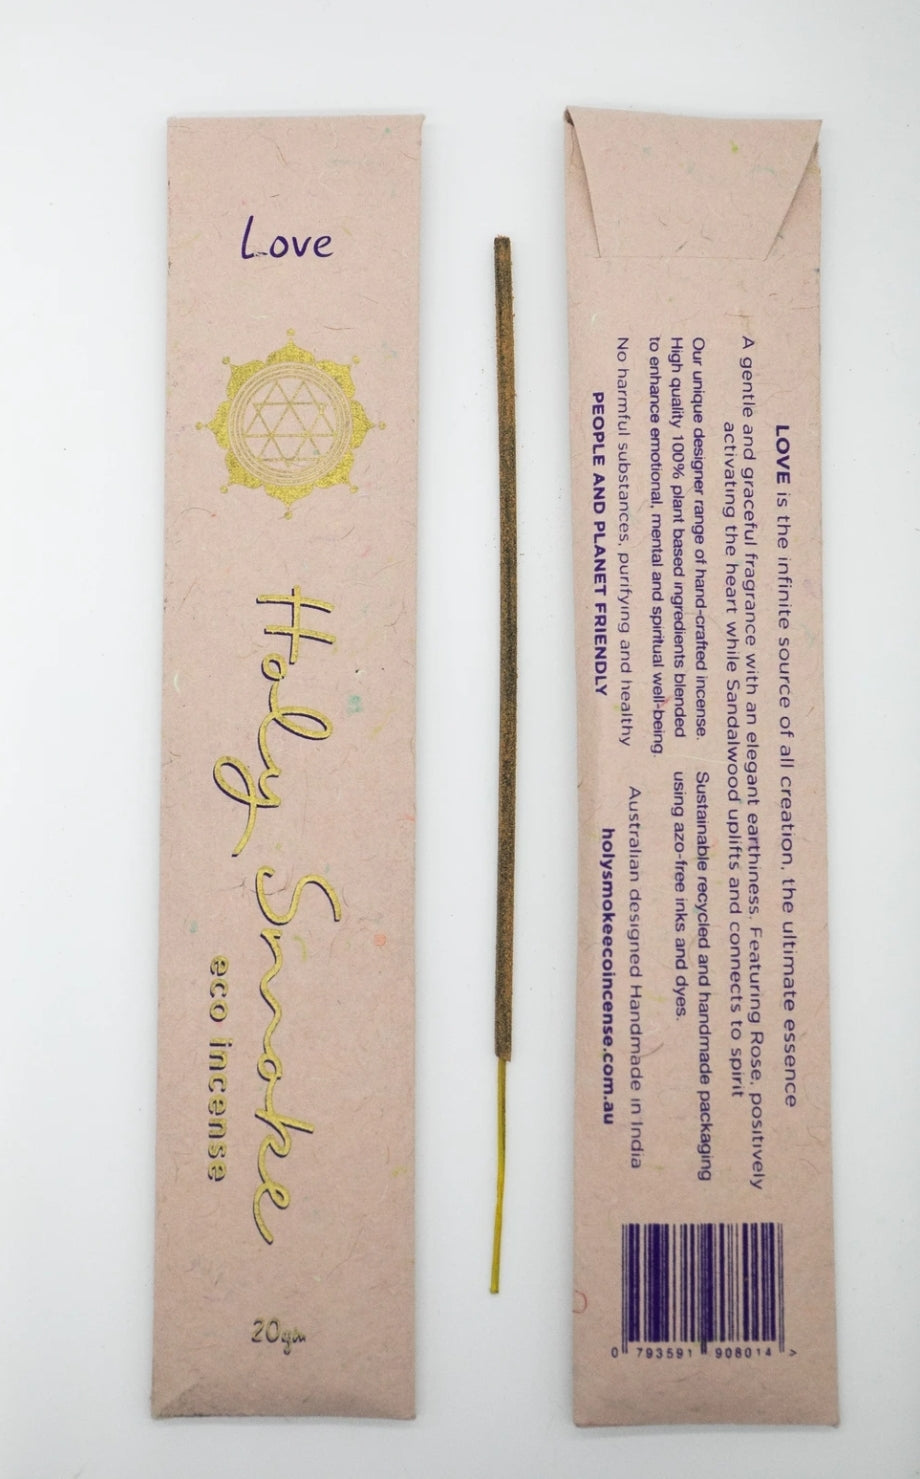 Mellow & Sublime Holy Smoke Incense 4 pack